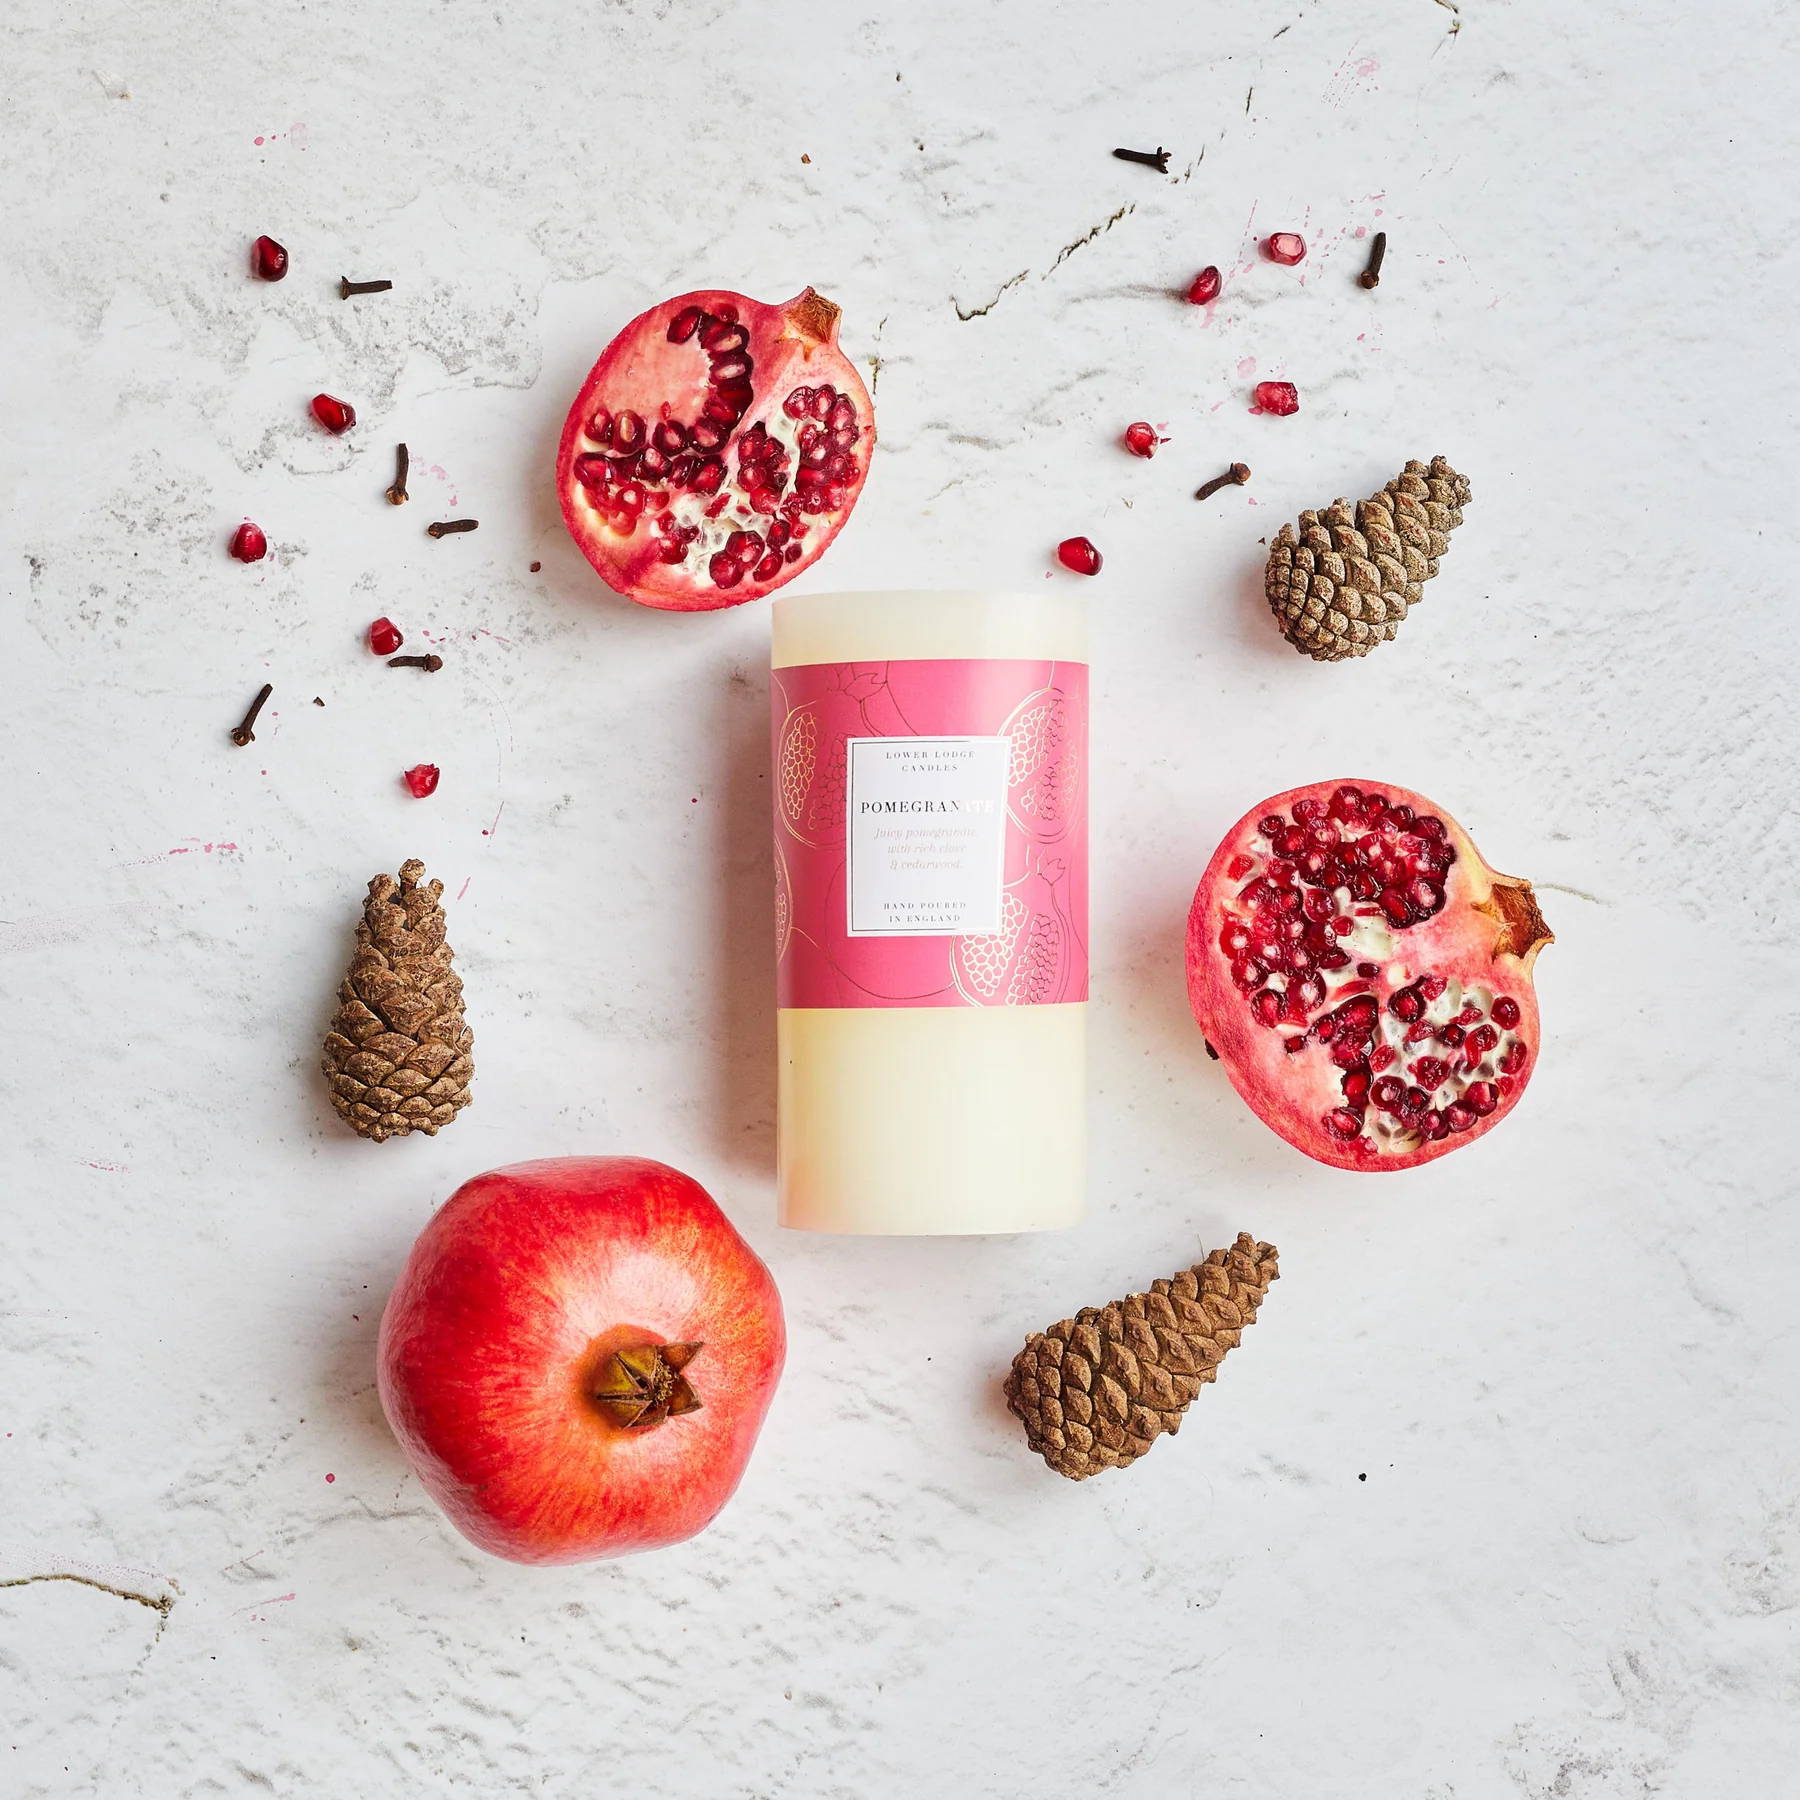 Sandalwood & Cashmere Luxury scented candle from Lower Lodge Candles Colour Pop! collection pictured with its cardboard tube packaging against a bright pink background with wood chippings